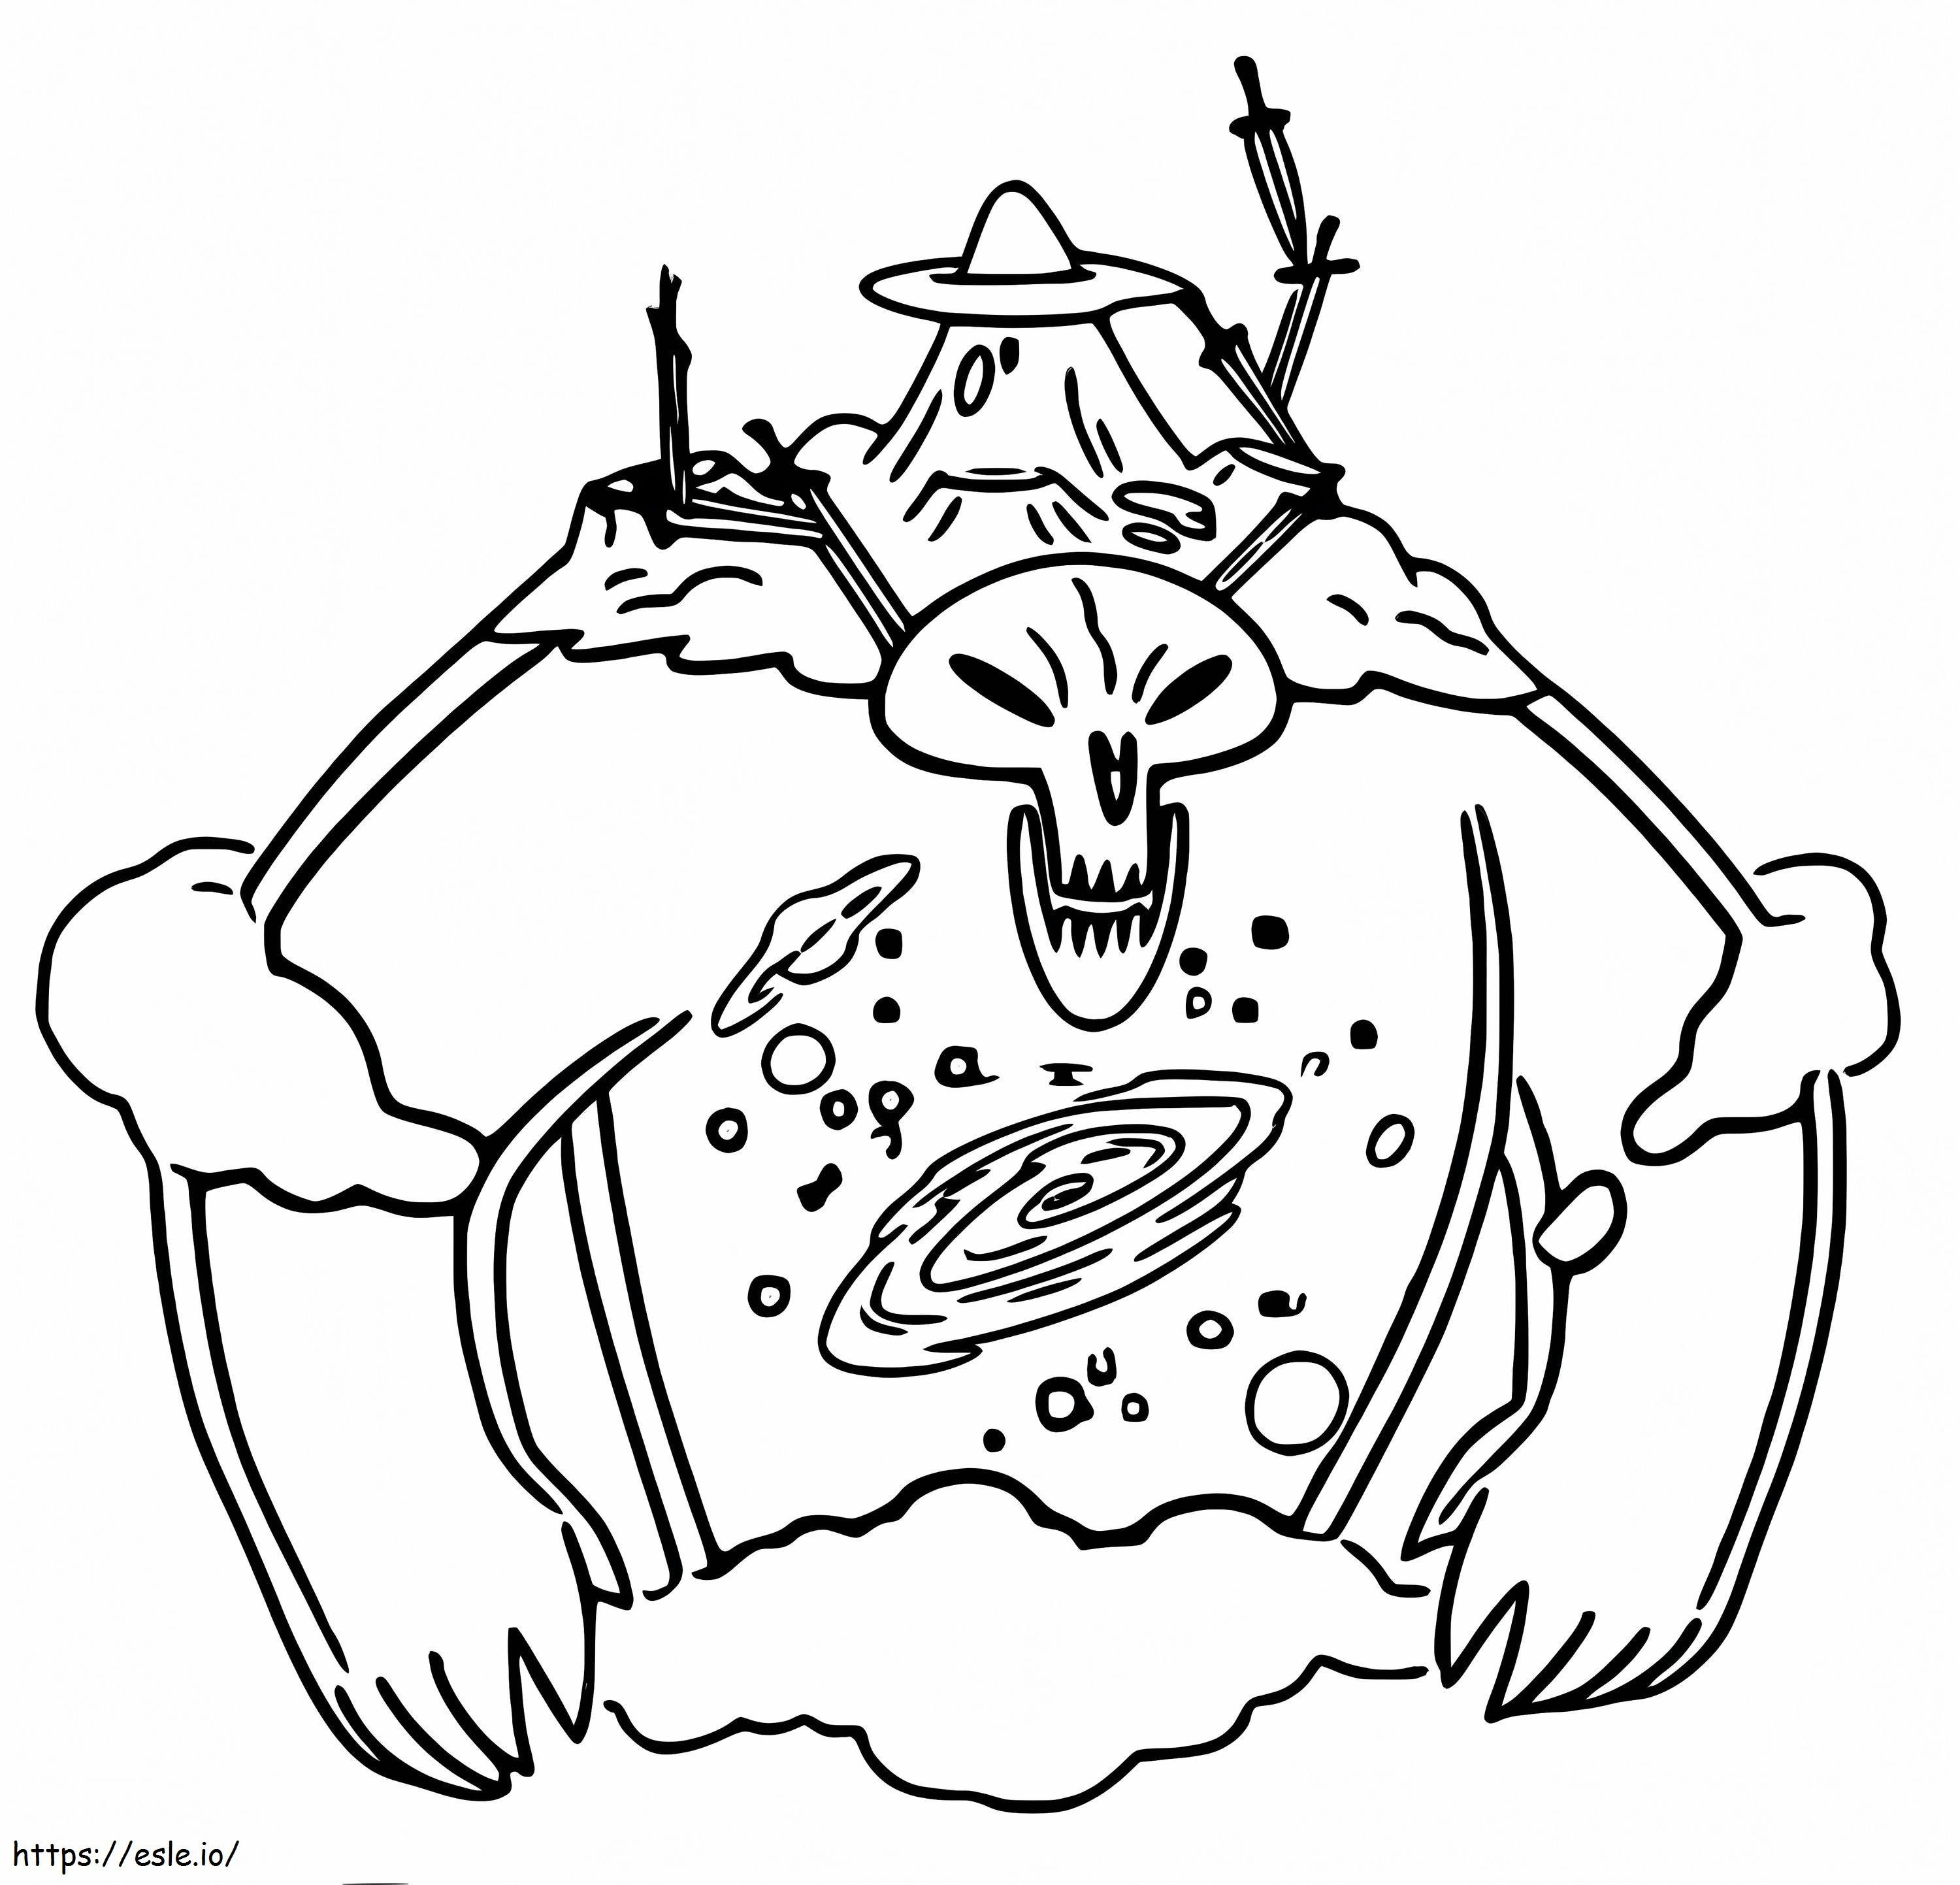 Omnitraxus Prime coloring page